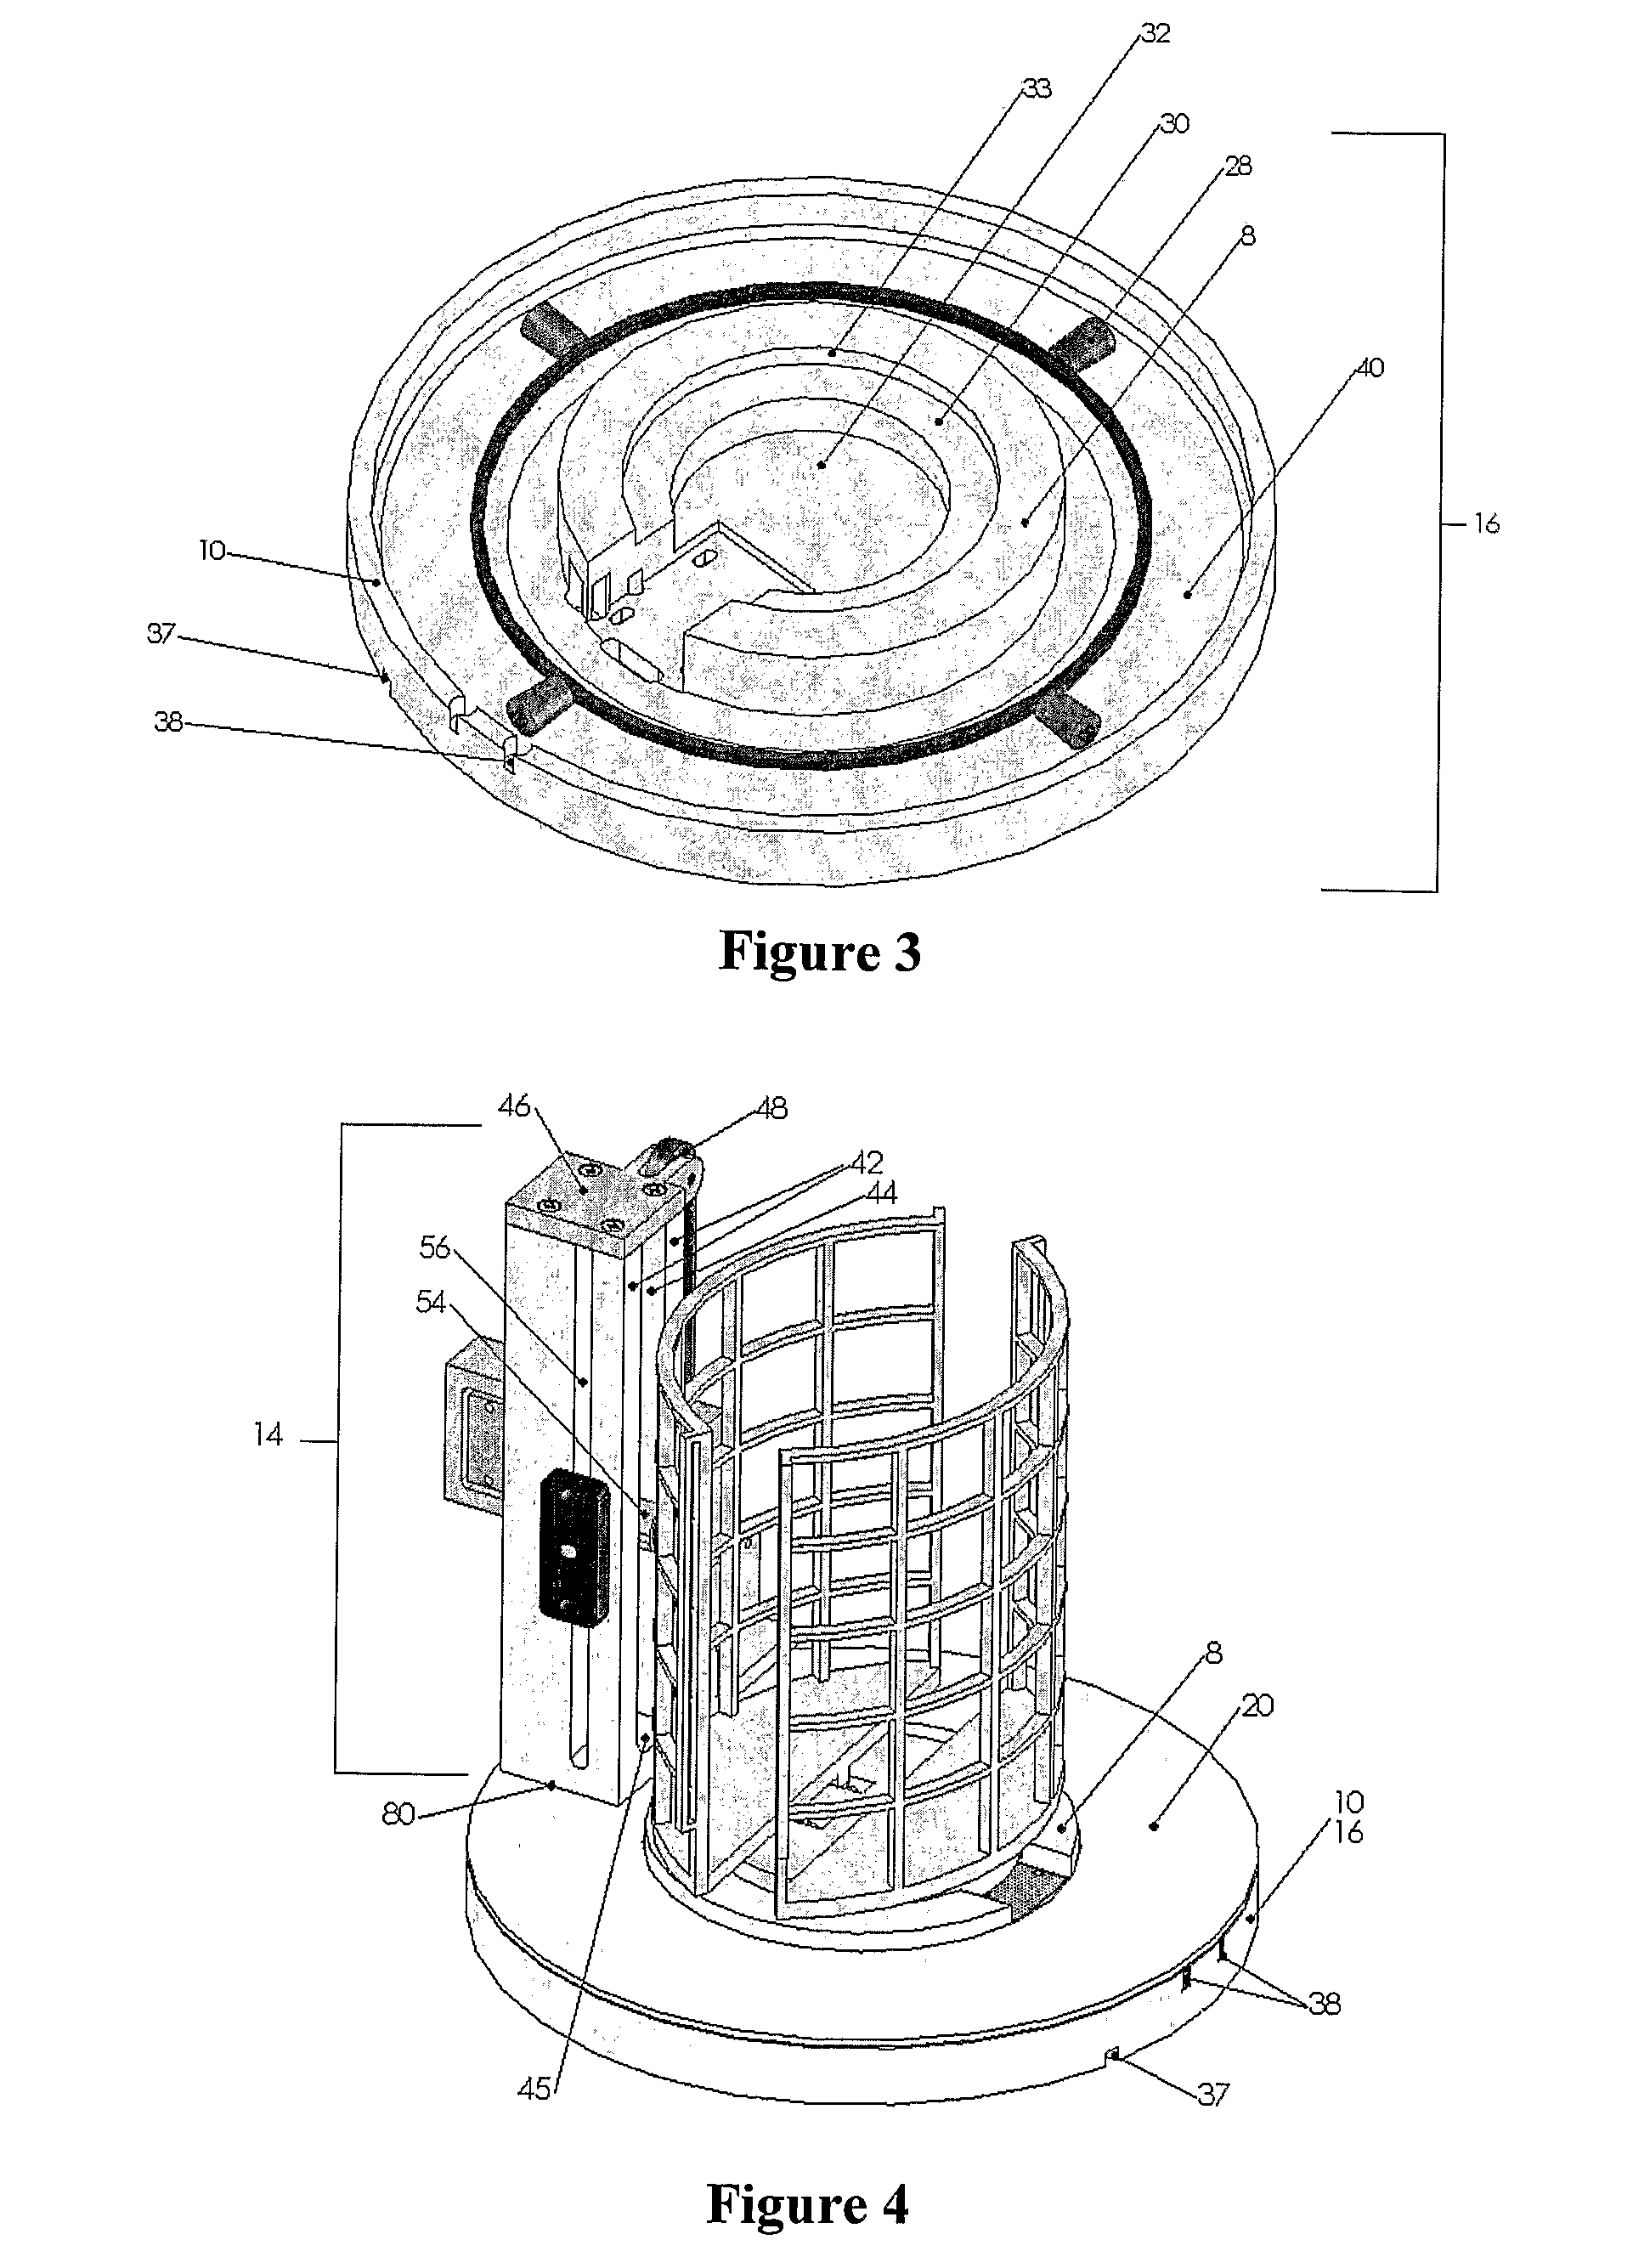 Interventional Immobilization Device